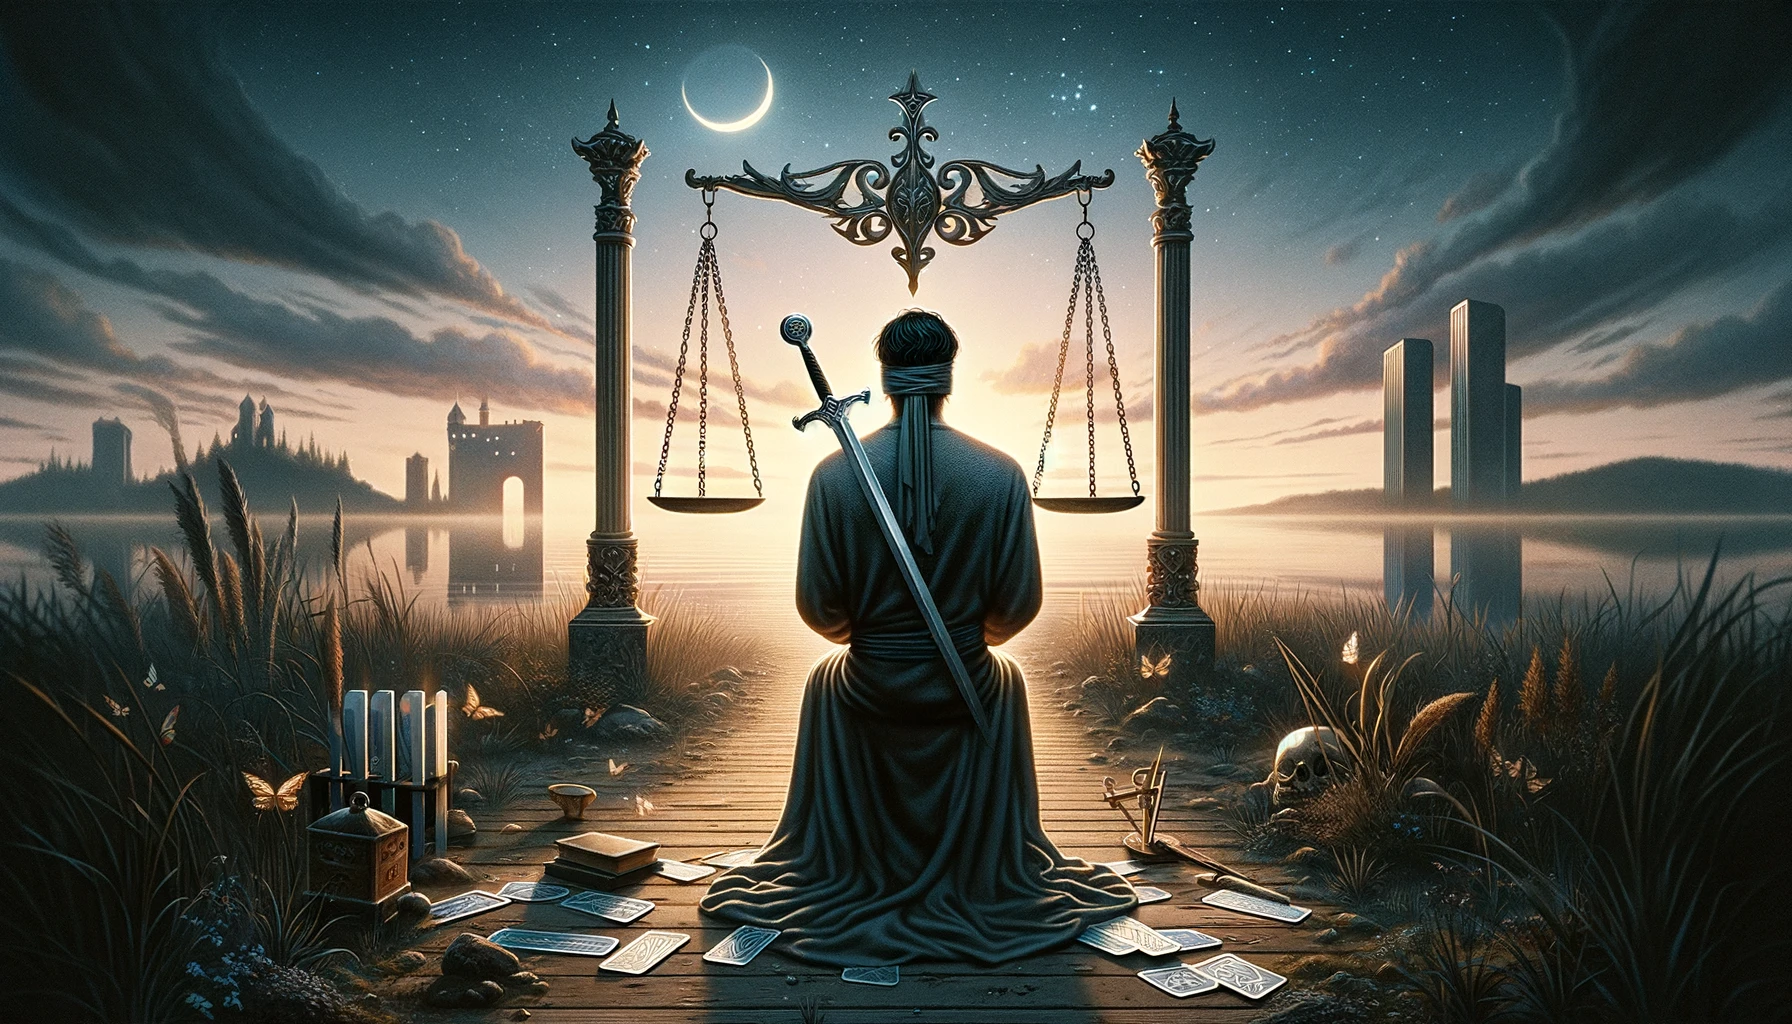 "Illustration depicting an individual embodying qualities of balance and indecision, facing the challenge of making decisions amidst uncertainty and the potential for peace through compromise, set against a backdrop symbolizing the theme of equilibrium and the complexity of decision-making."